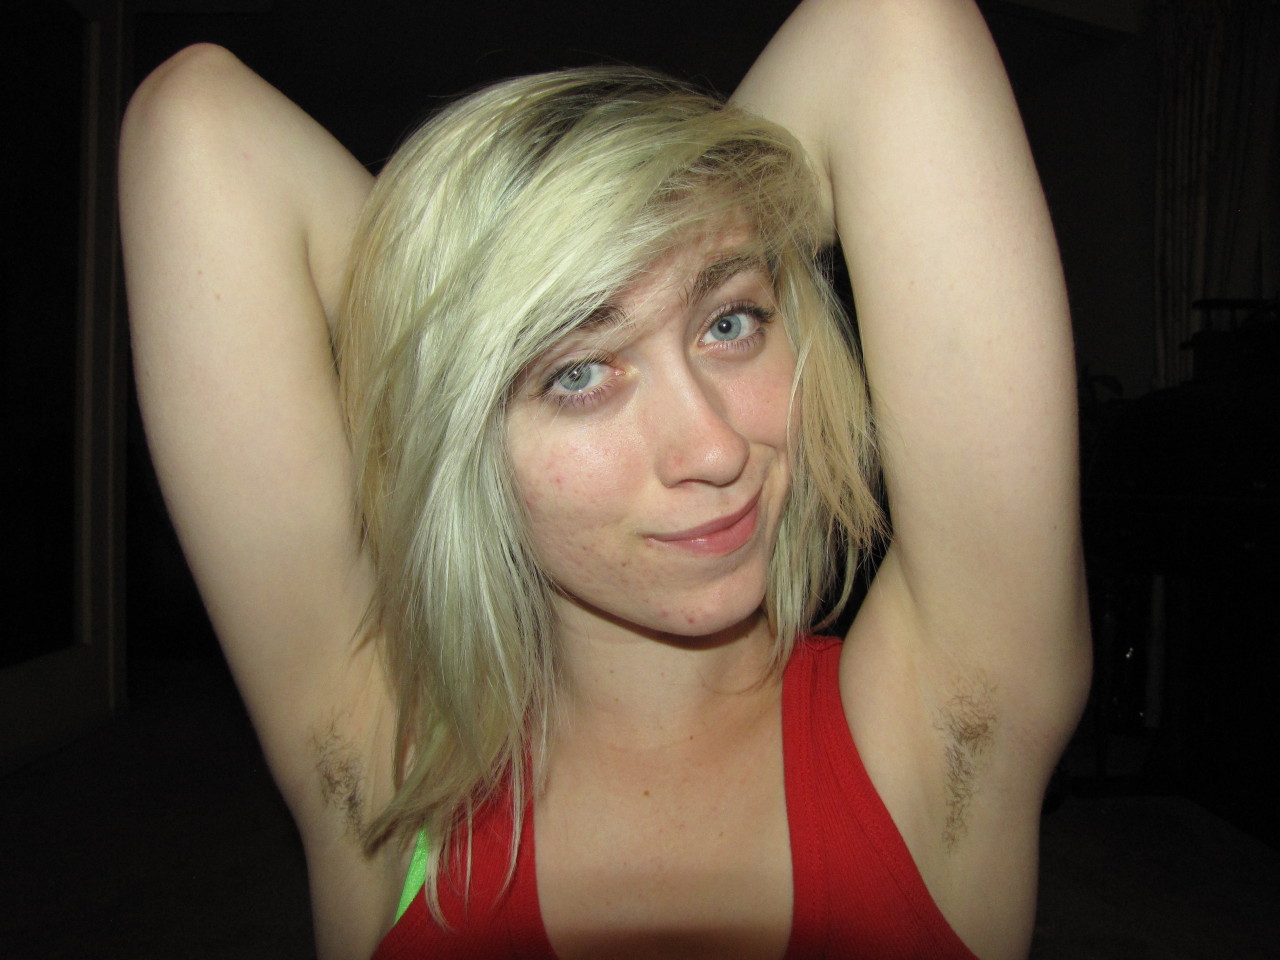 little-miss-shayla:  So this was as far as I got in no shave november, I would have